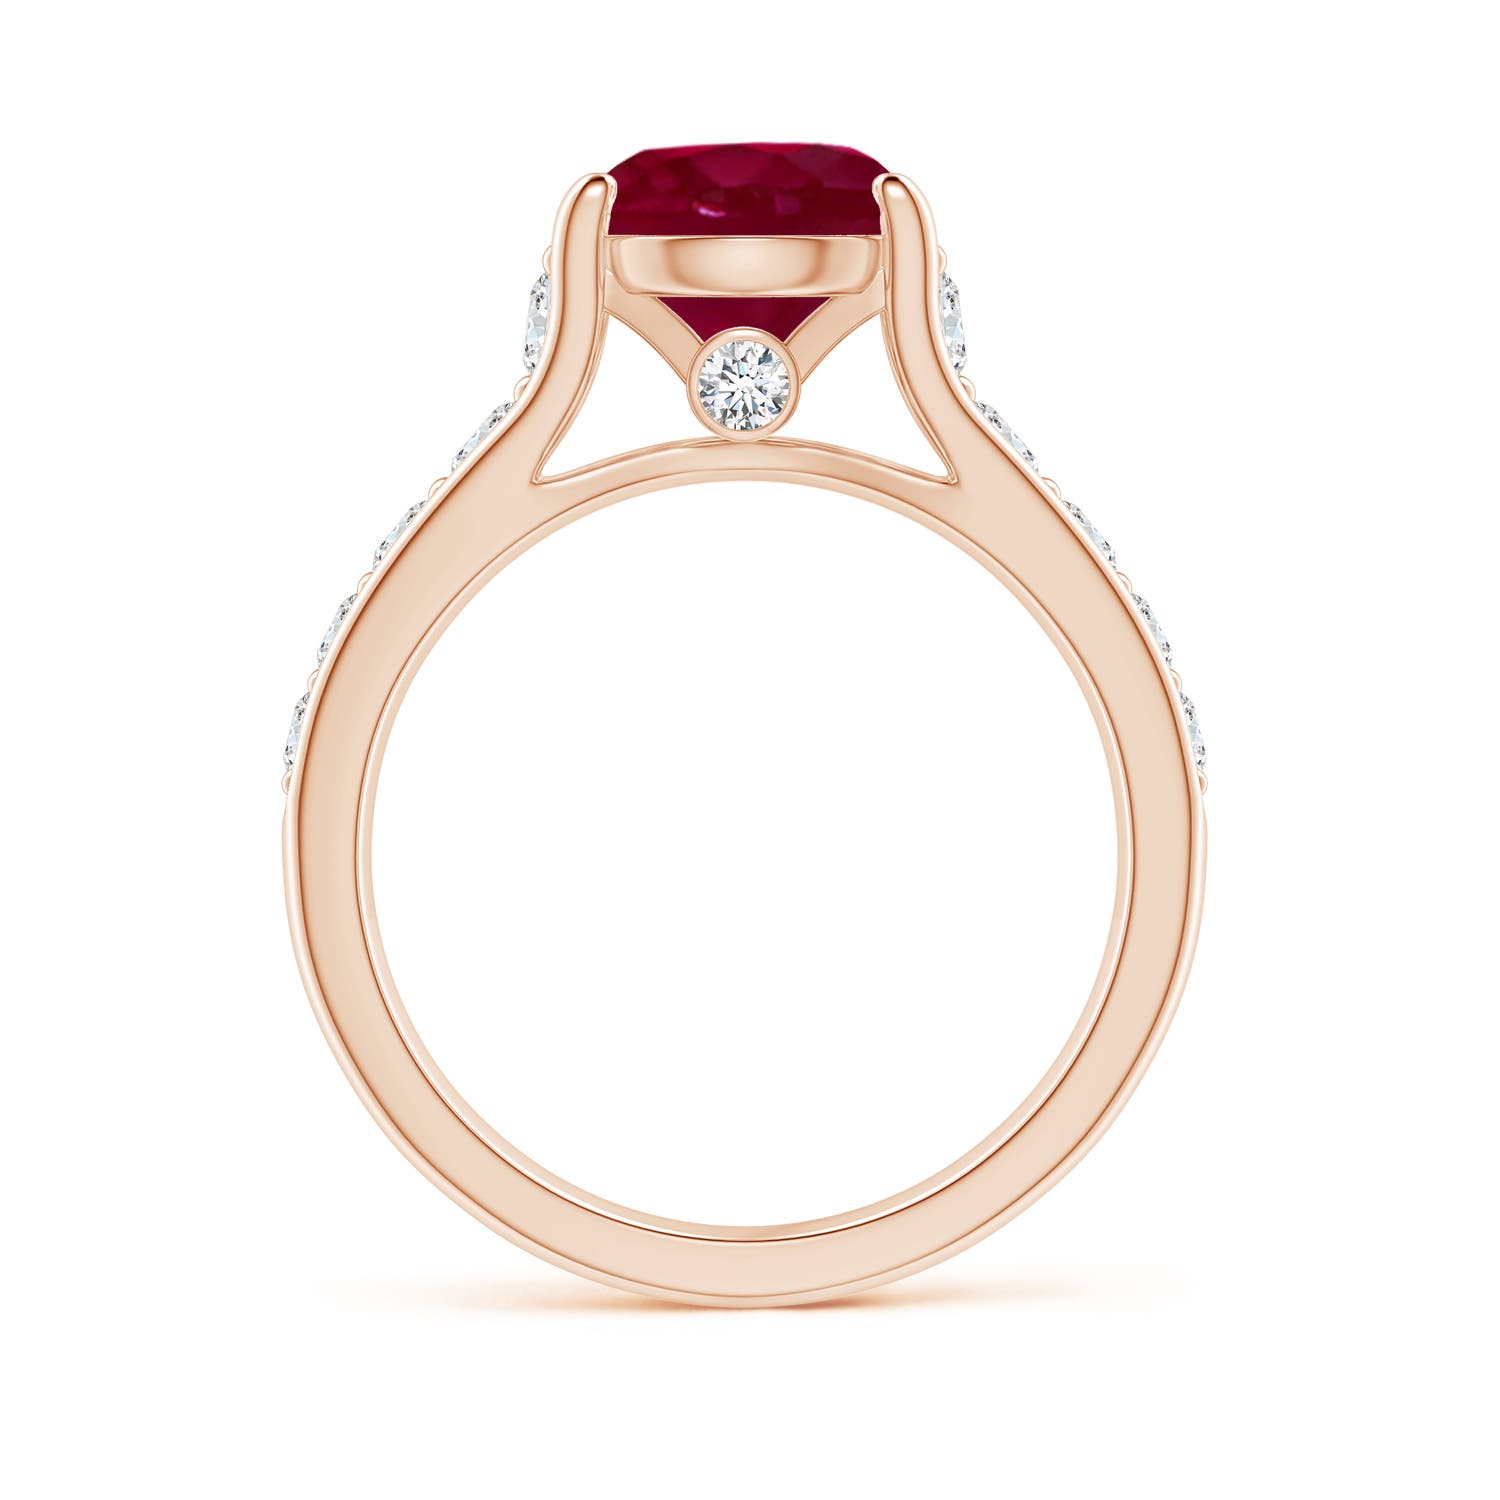 A - Ruby / 2.8 CT / 14 KT Rose Gold